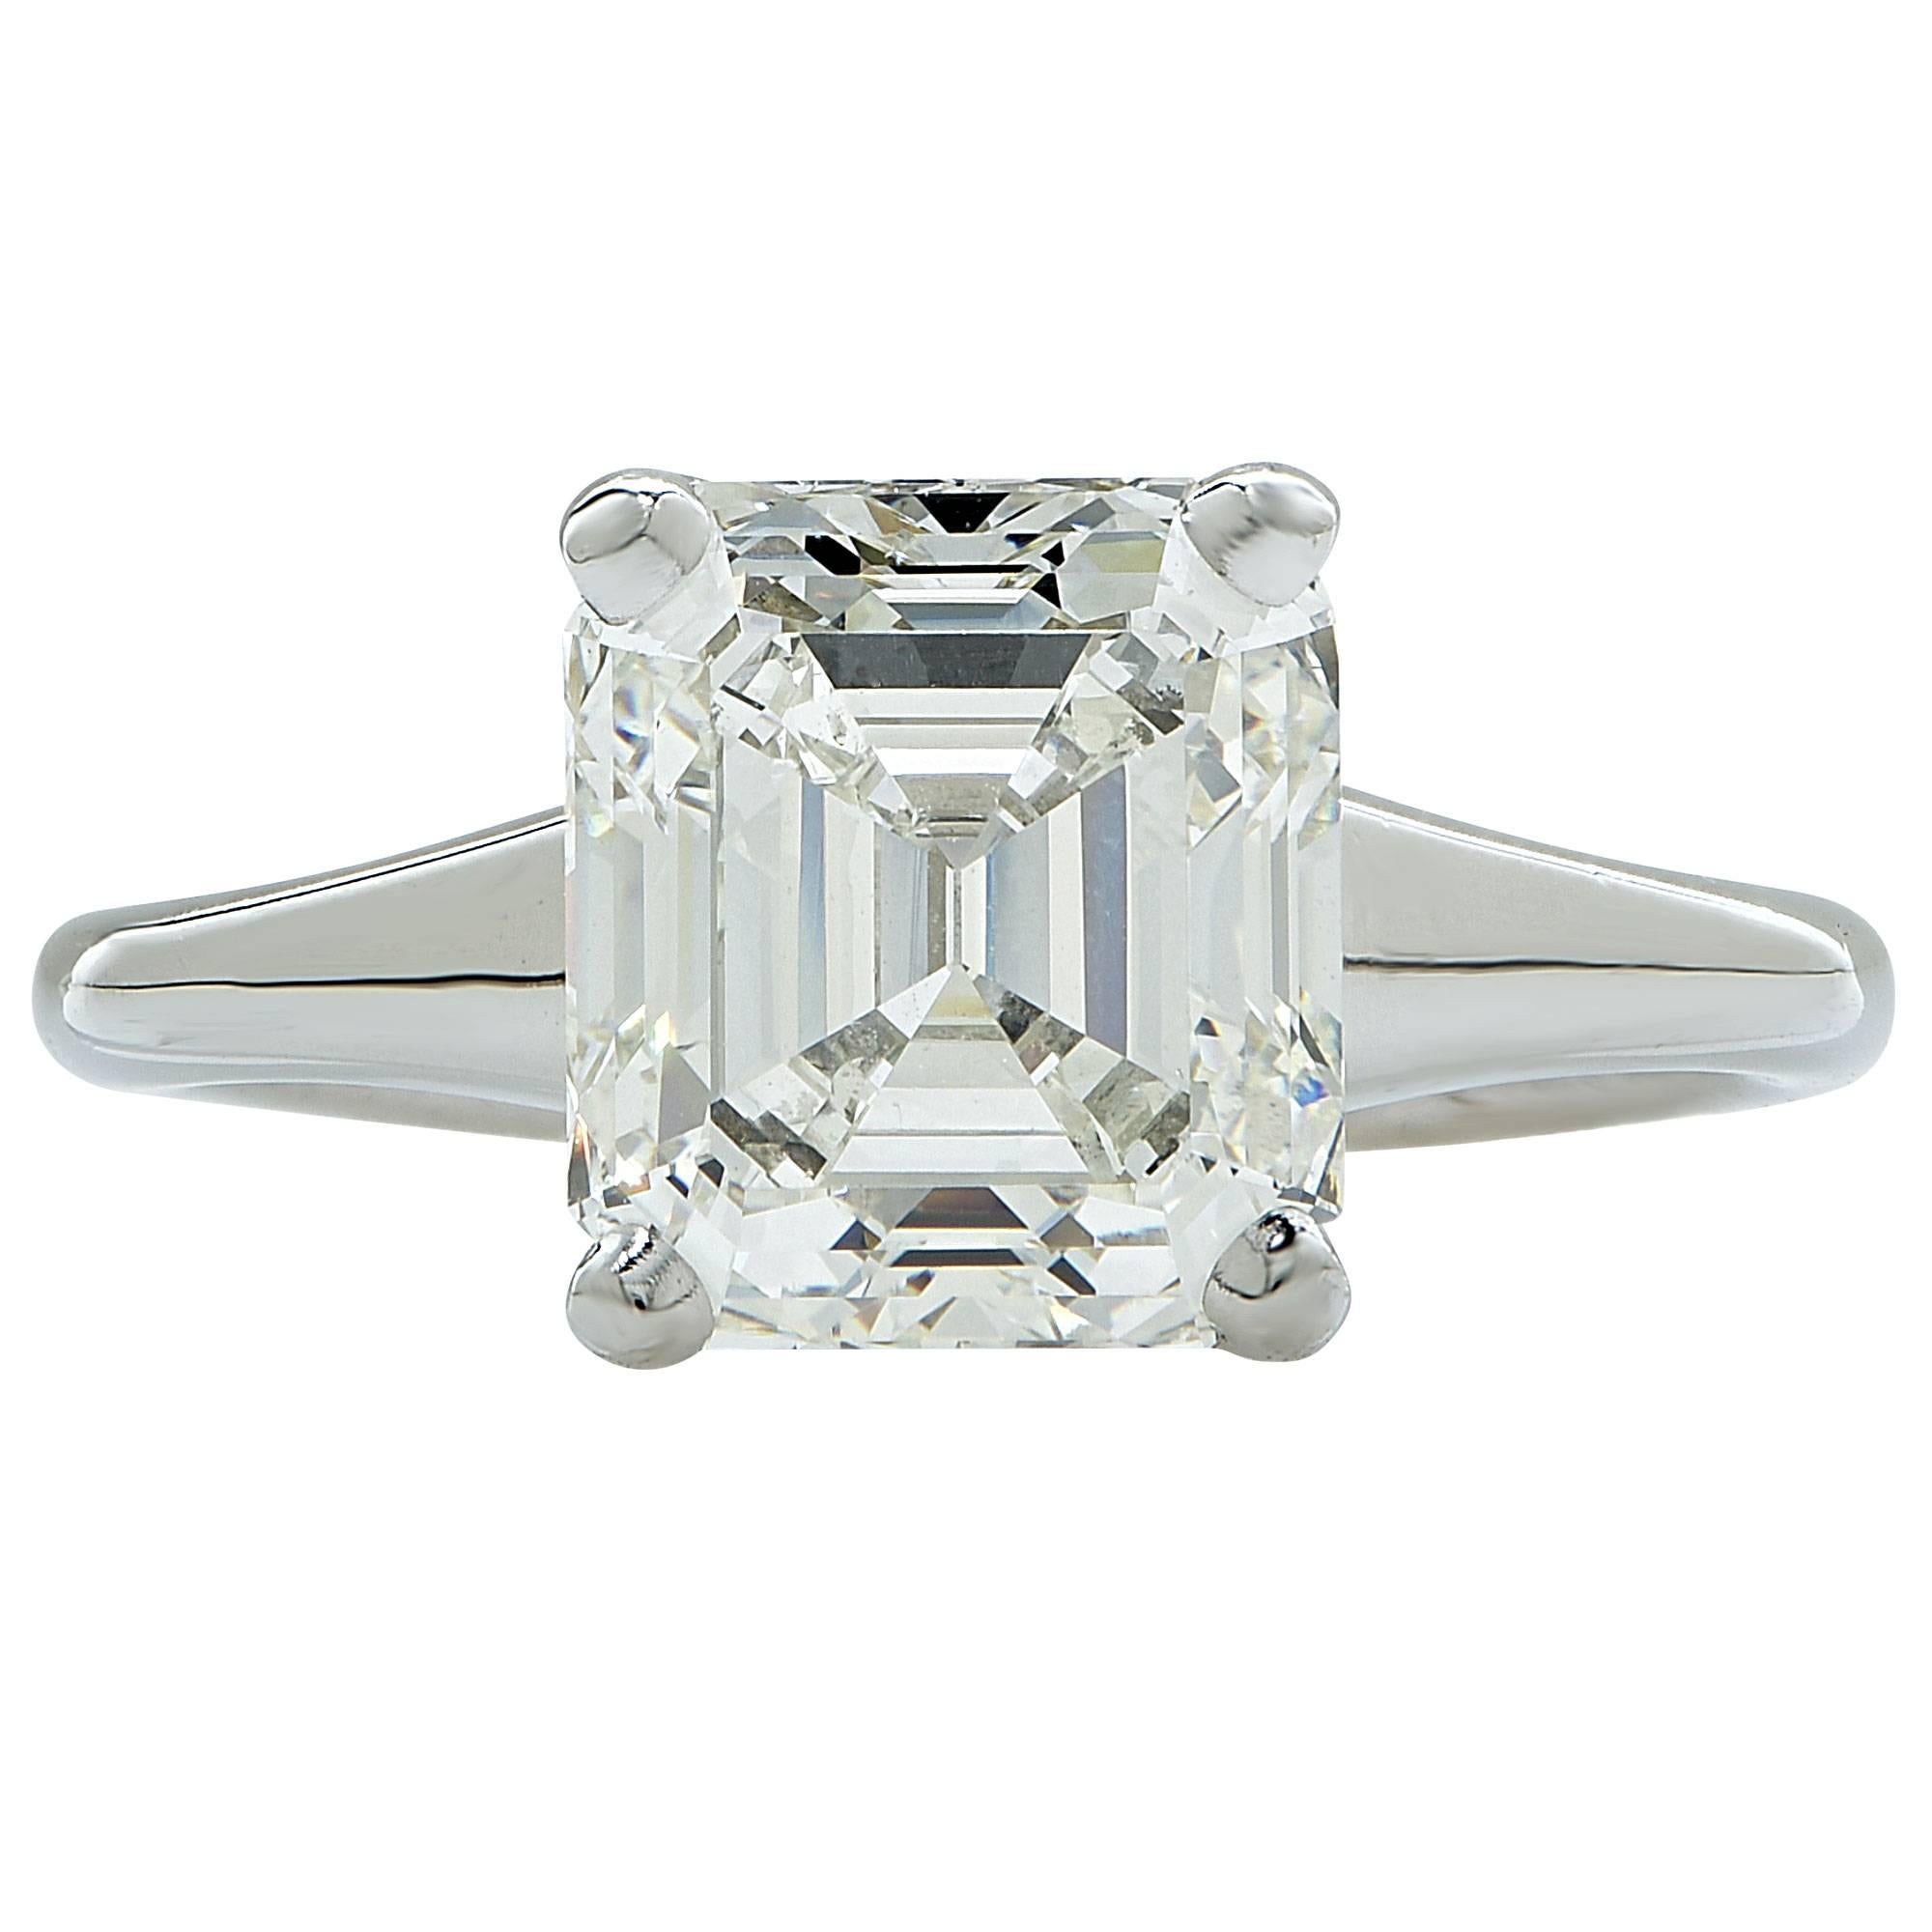 Platinum solitaire ring featuring a 3.14ct I color VS2 clarity GIA graded emerald cut diamond.

The ring is a size 6 and can be sized up or down.
It is stamped and tested as platinum.
The metal weight is 6.06 grams.

This diamond ring is accompanied